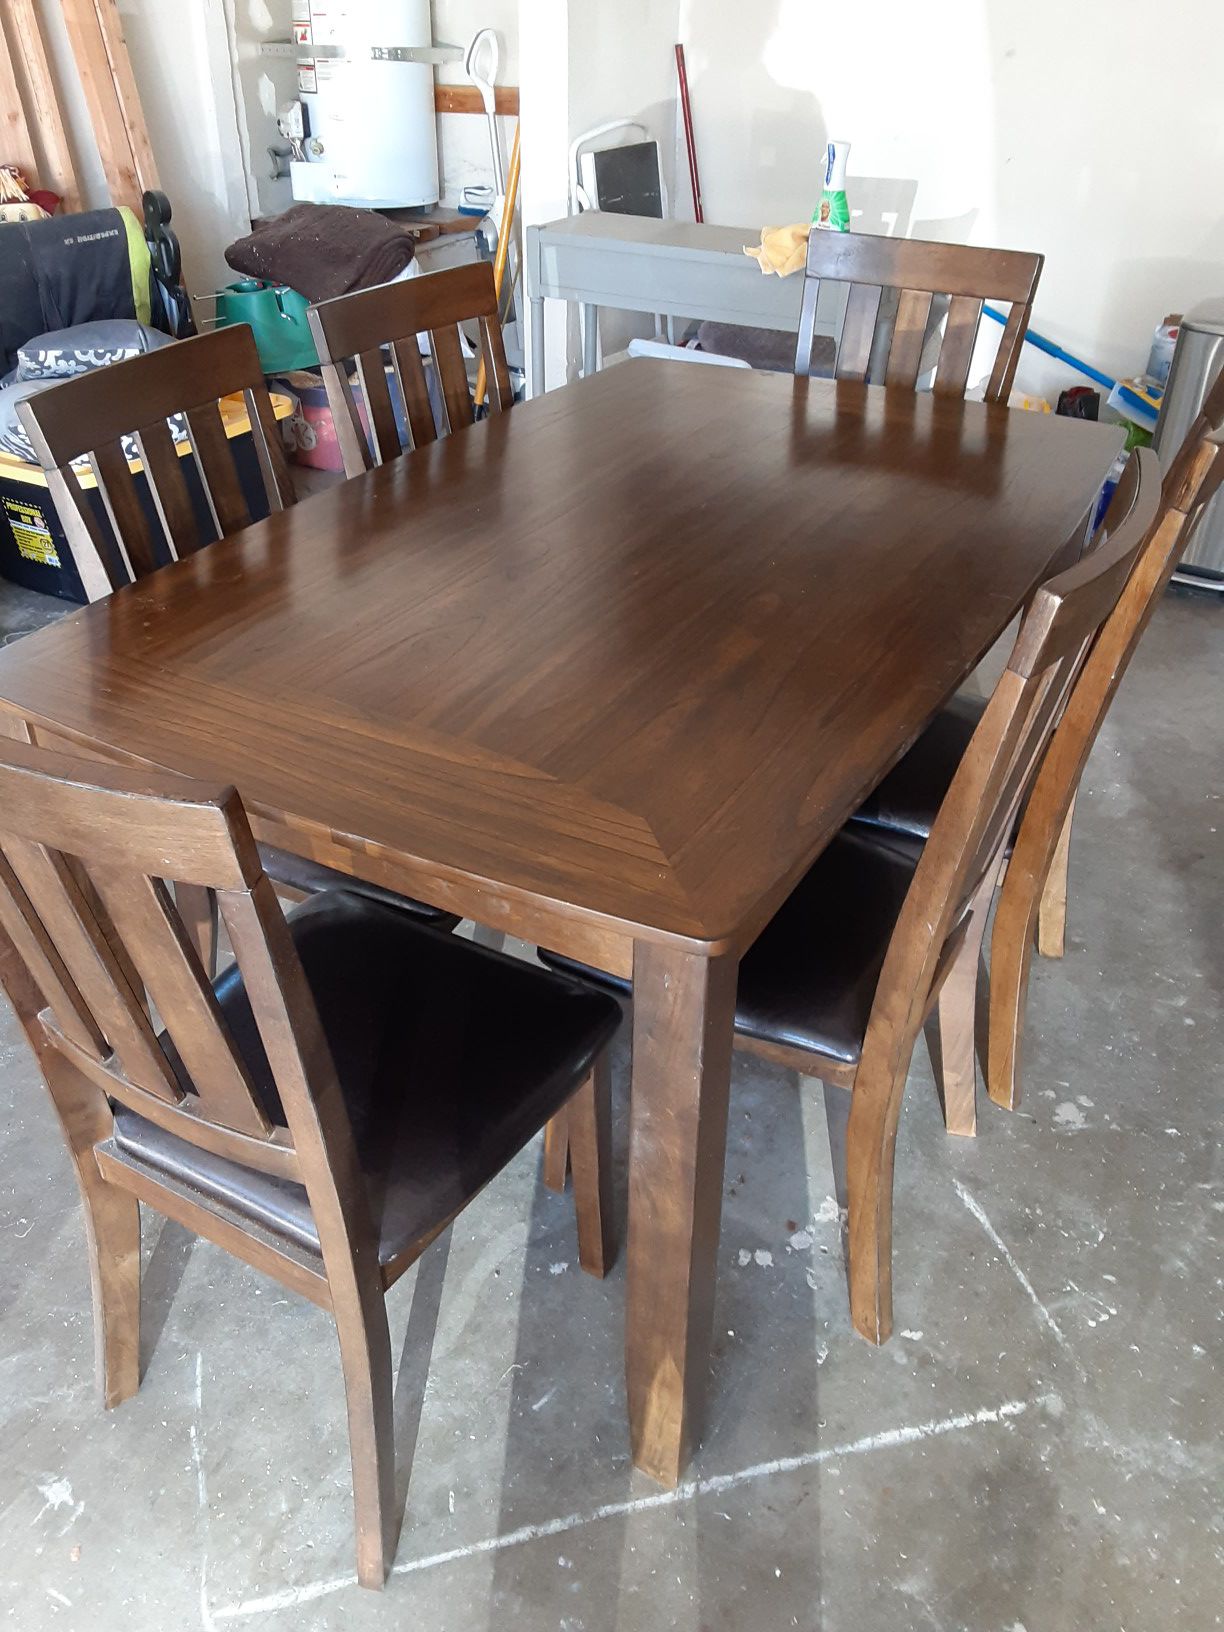 6 piece set dining table